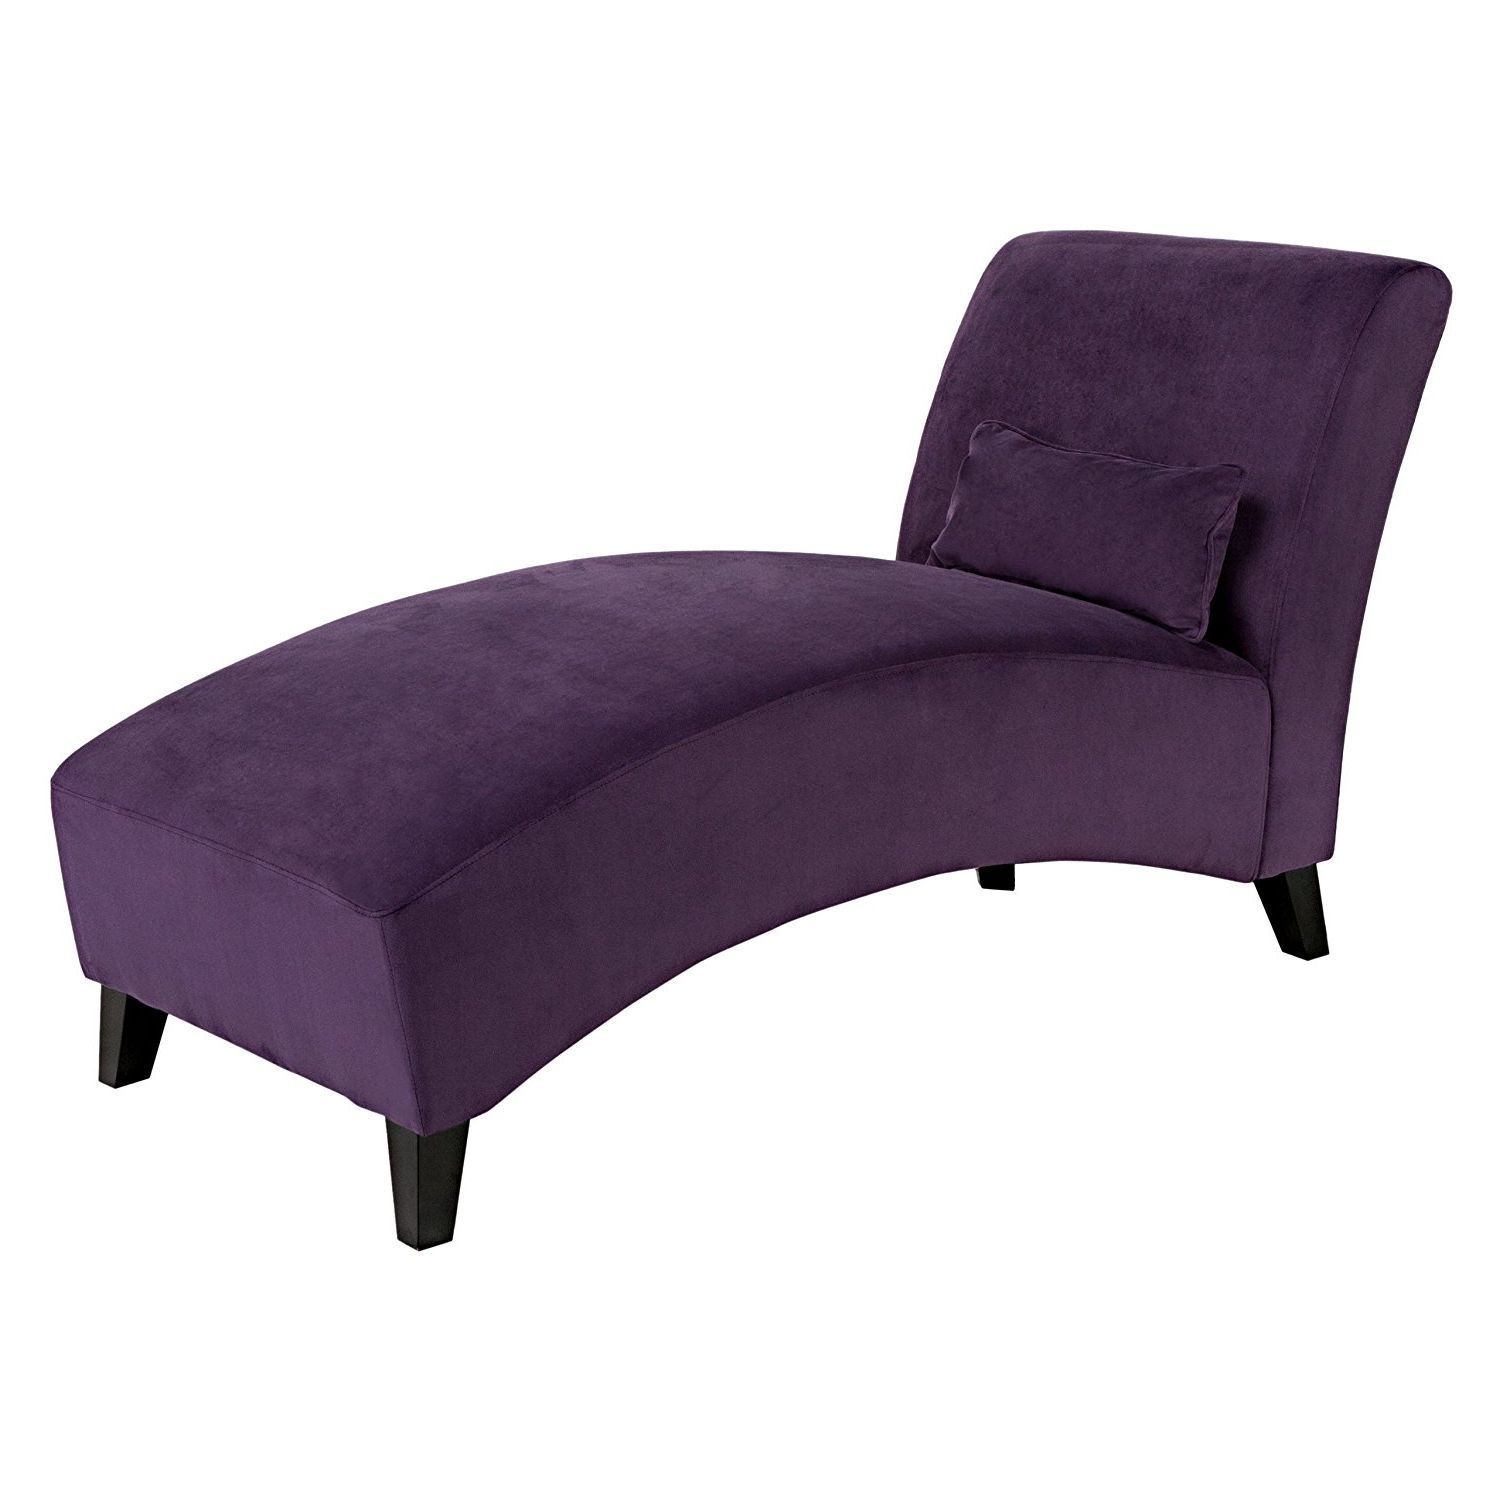 Amazon: Handy Living Chaise Lounge Chair, Purple: Kitchen & Dining With Favorite Purple Chaise Lounges (View 1 of 15)